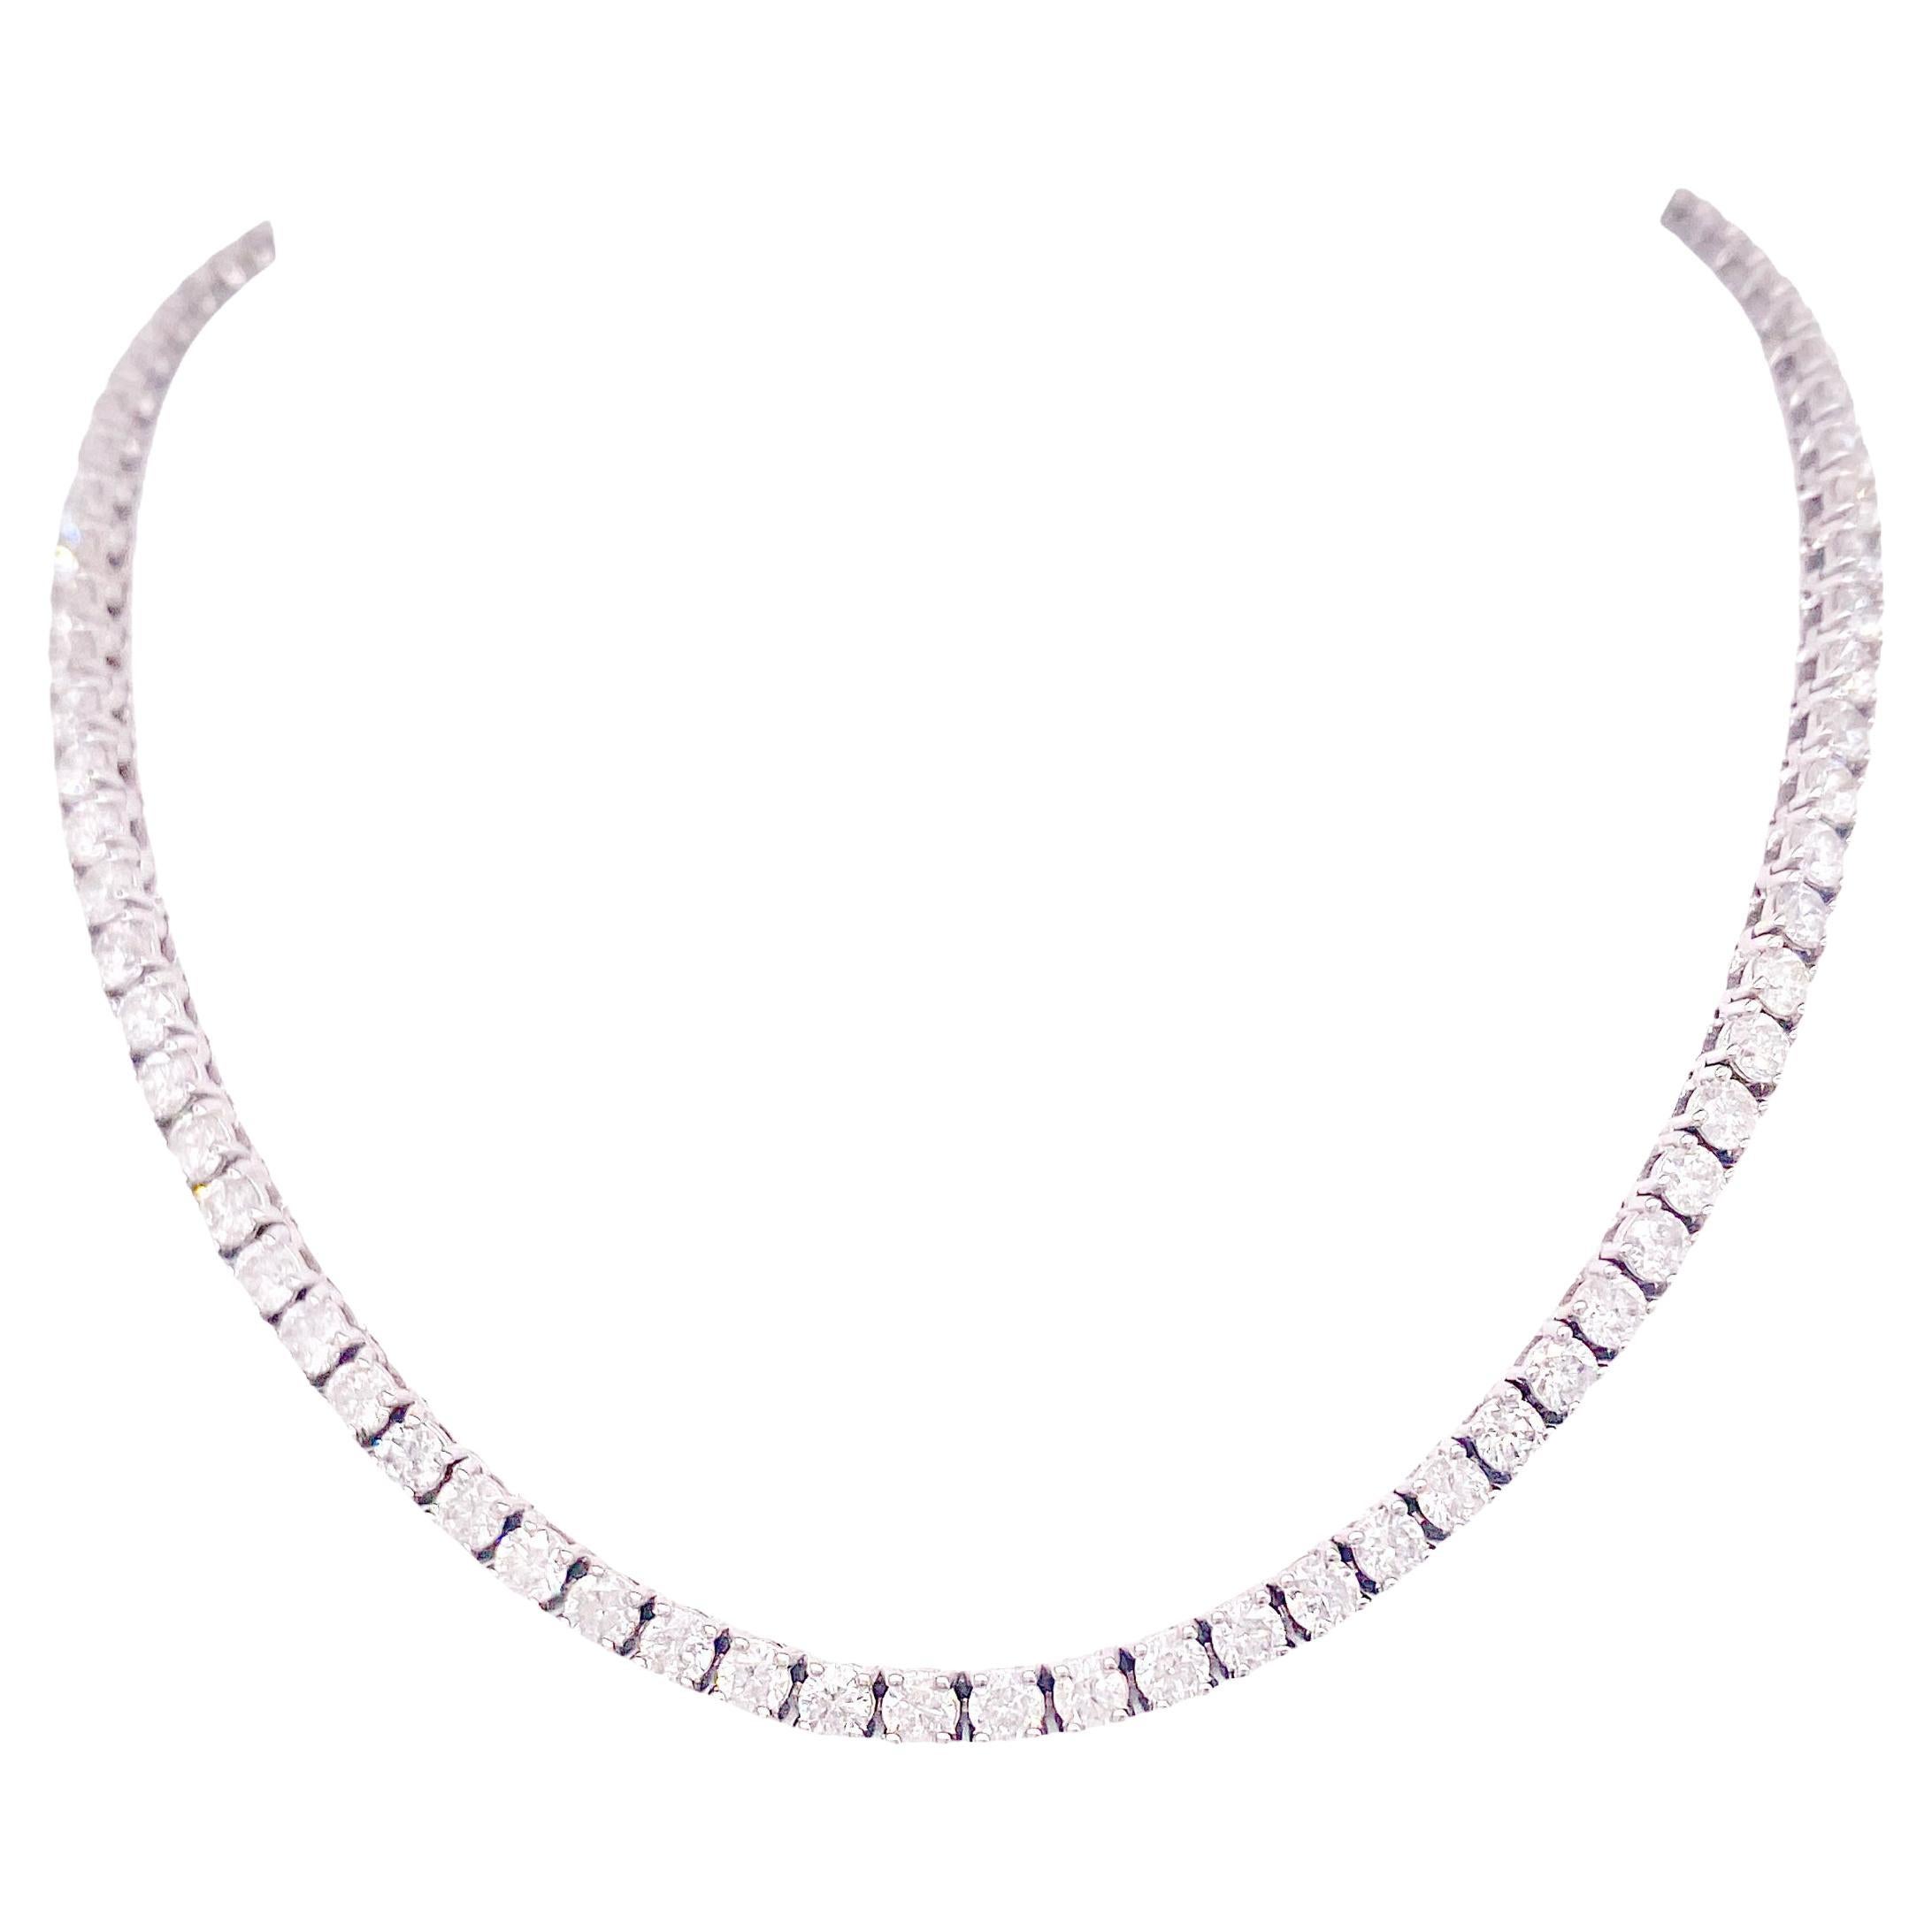 9.00 Carat Diamond Necklace Riviera Necklace White Gold, Tennis Any Length Avail